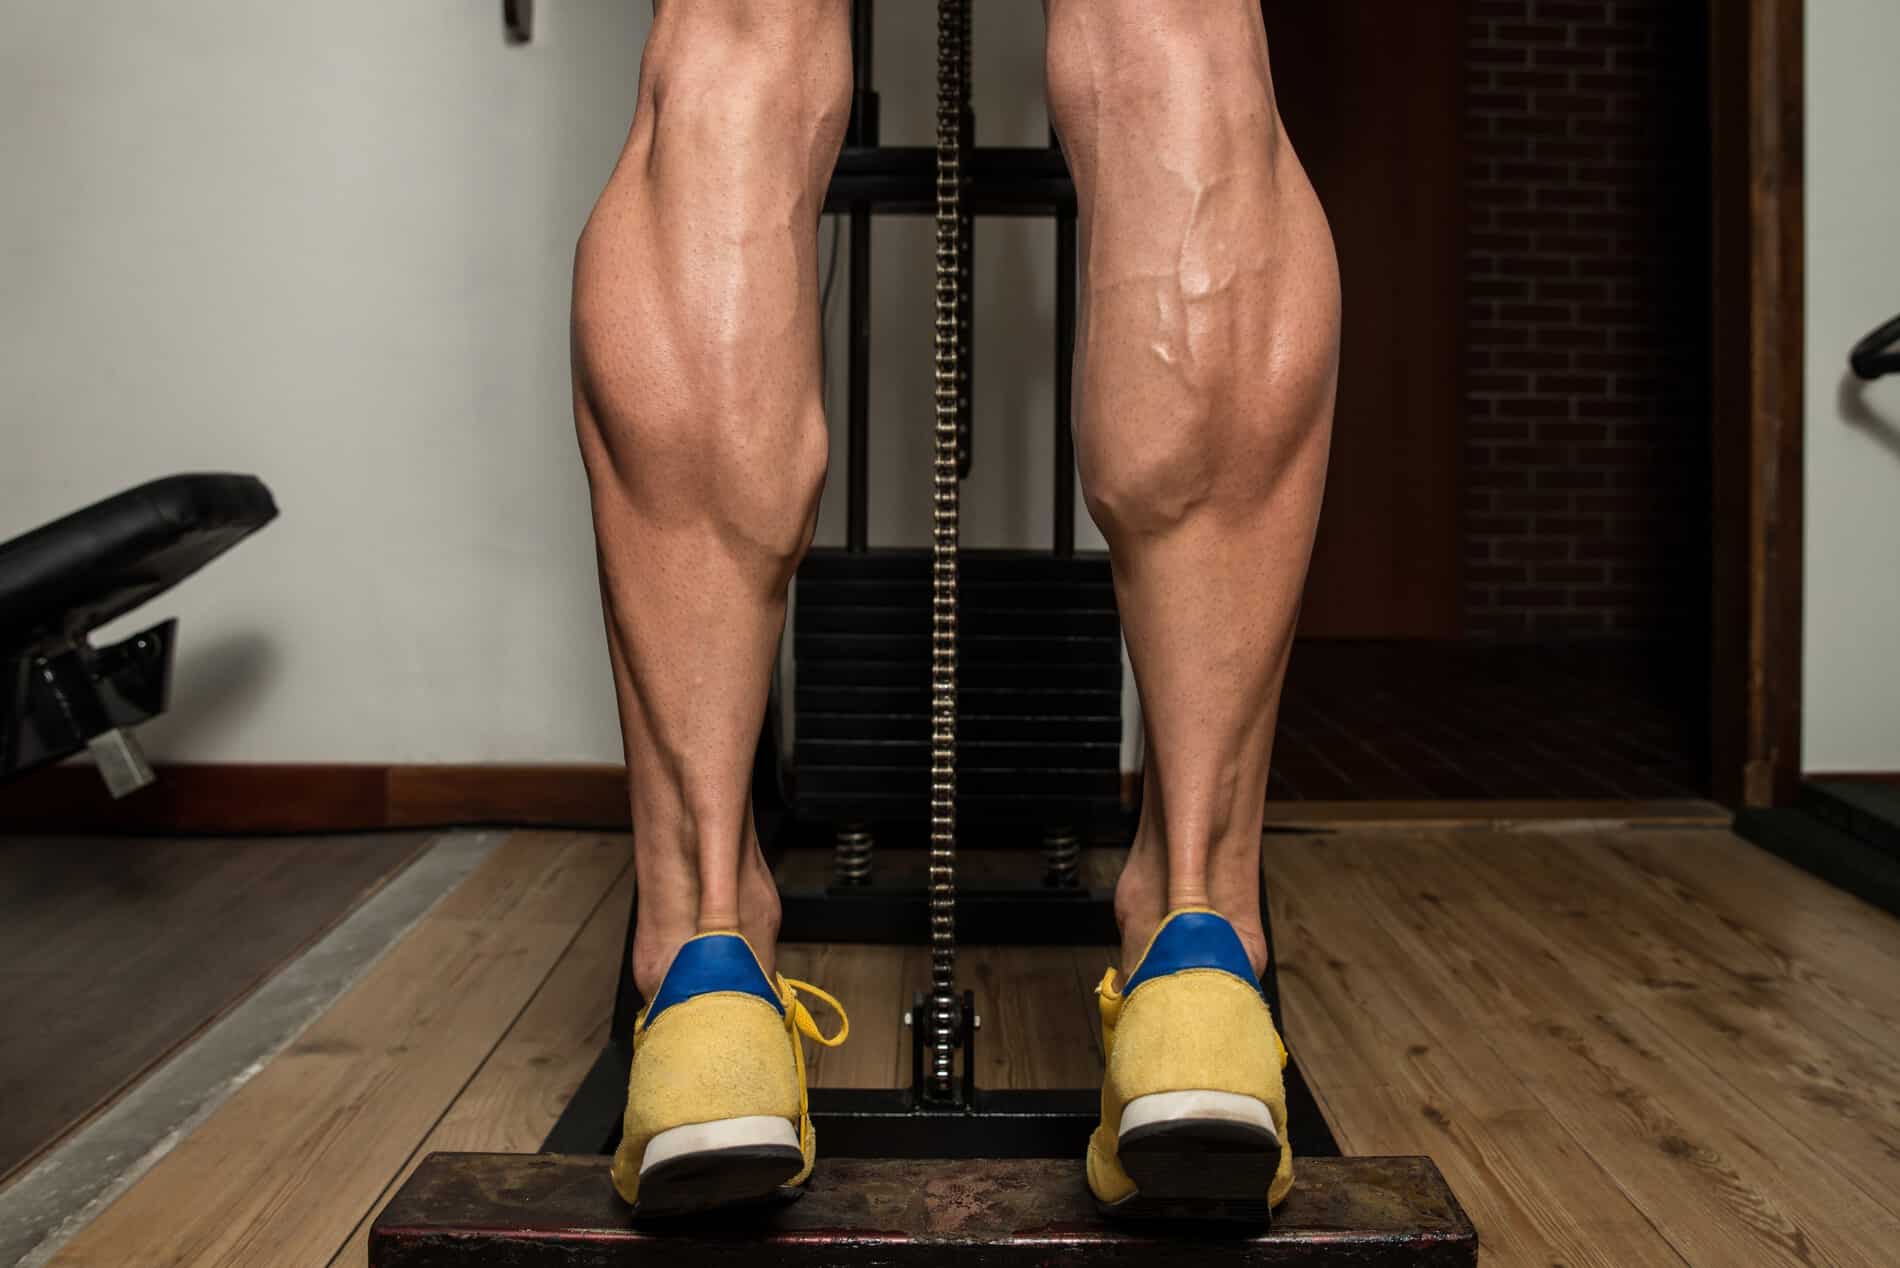 Calf Workouts: How to Grow the Often-Stubborn Muscle Group - NASM